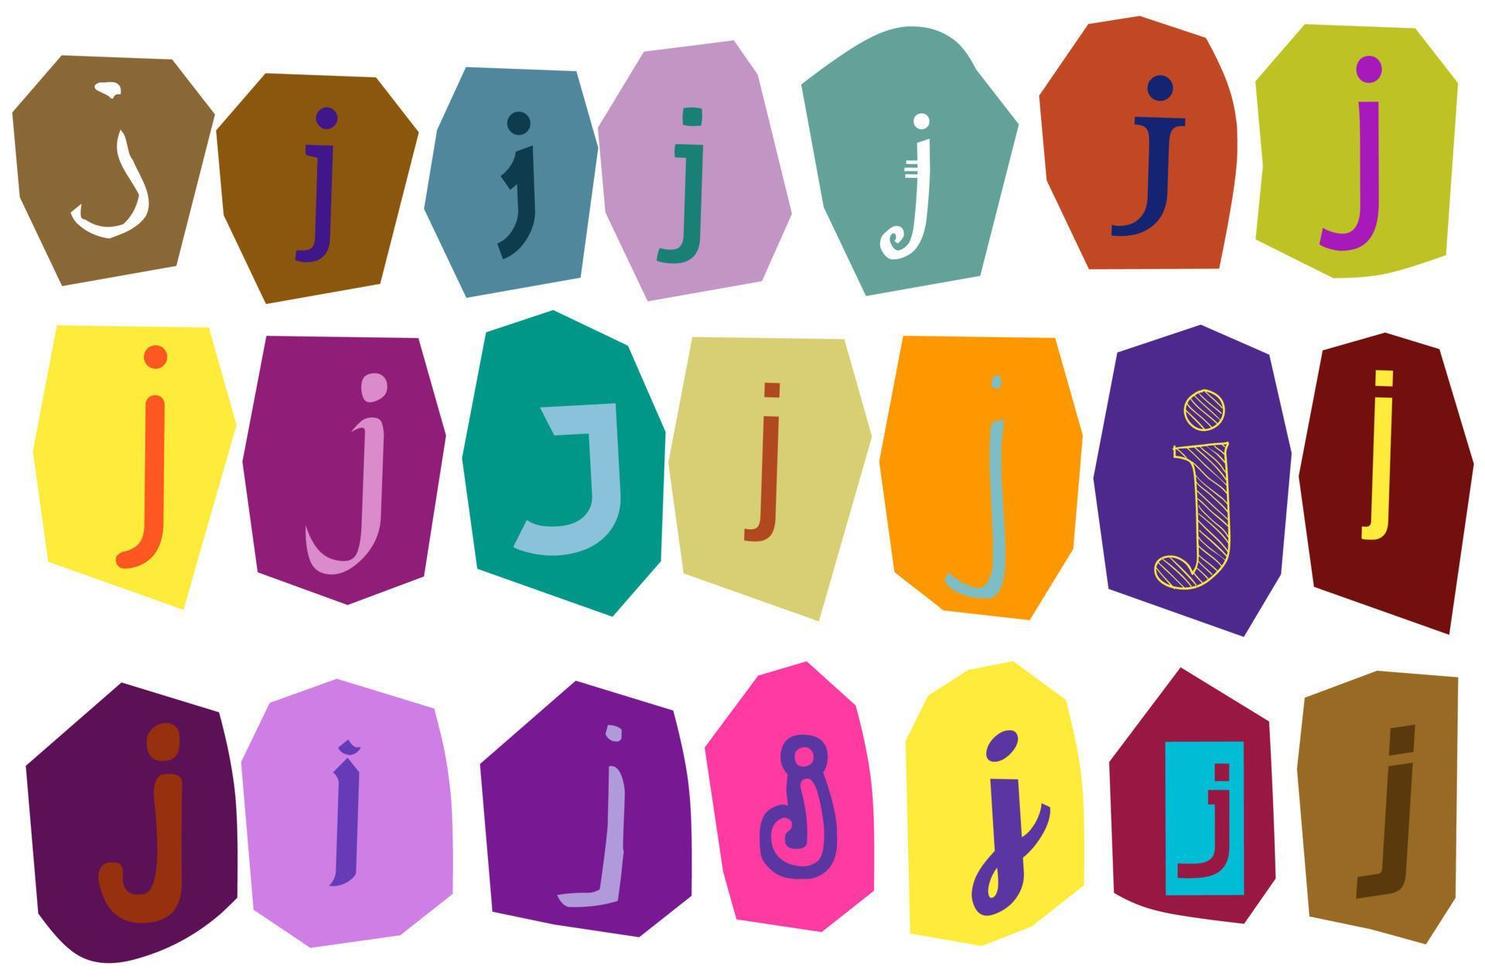 Alphabet j- vector cut newspaper and magazine letters, paper style ransom note letter